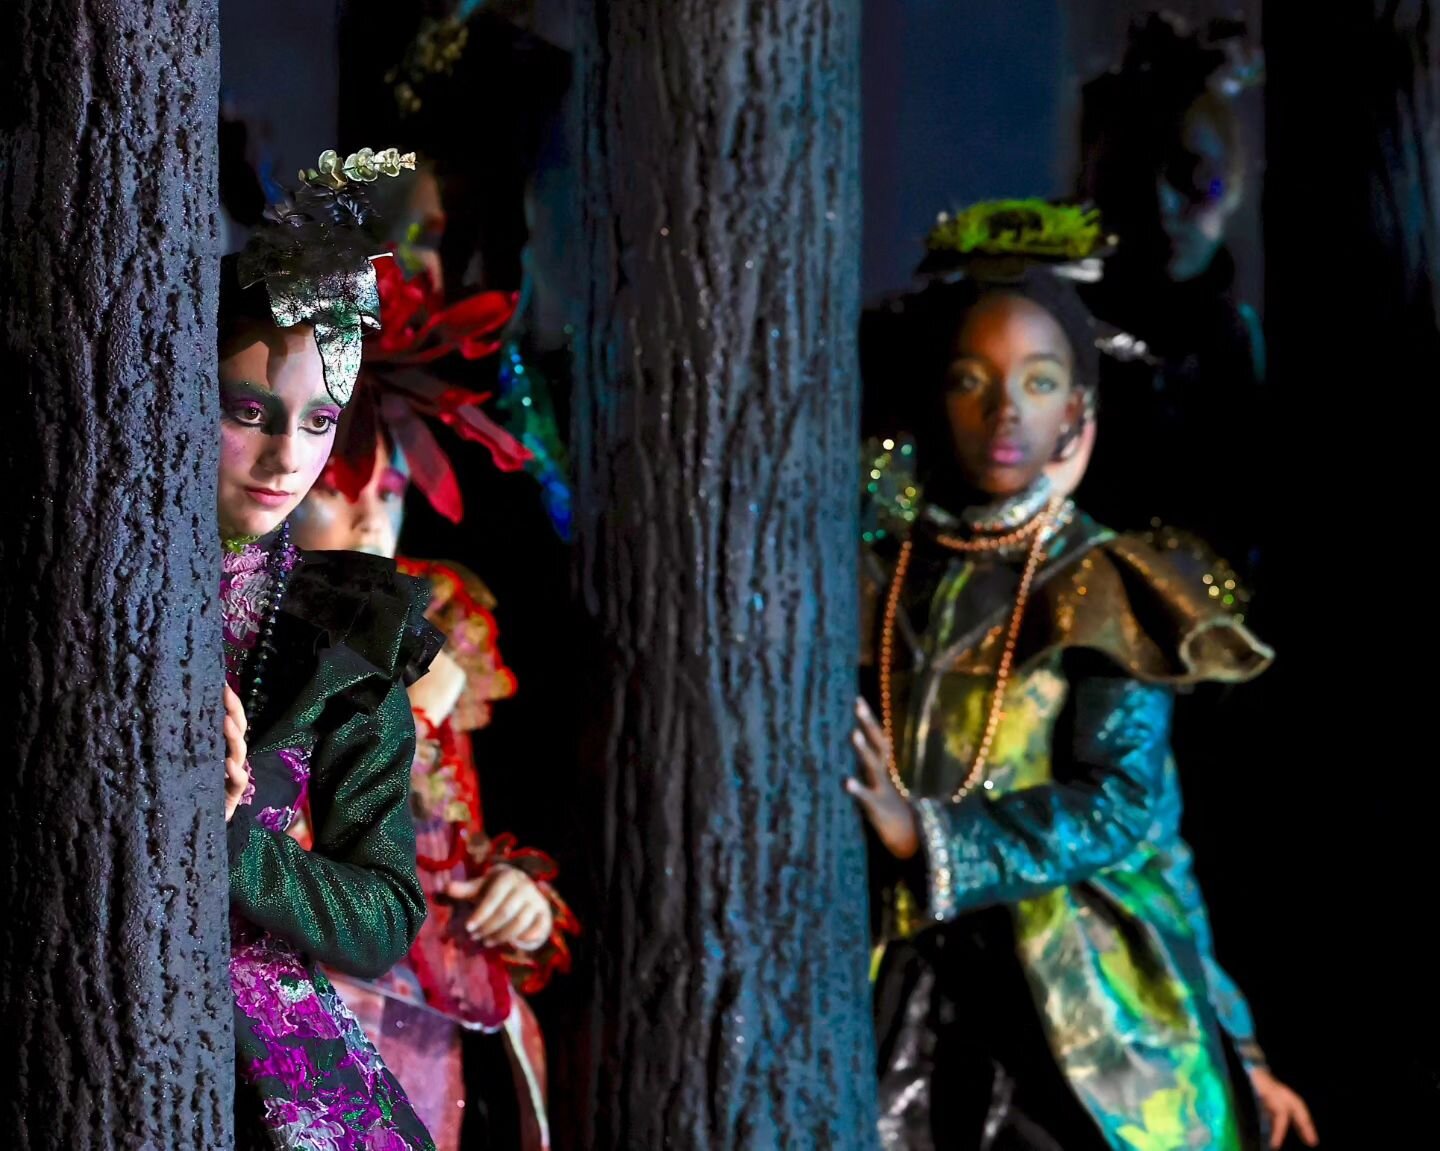 Opening night of A Midsummer Night's Dream tonight at the Royal Opera House of Muscat - the project is a co-production with the Teatro Carlo Felice in Genoa.

Directed by Laurence Dale, associate director and choreography by Carmine De Amicis ,  assi